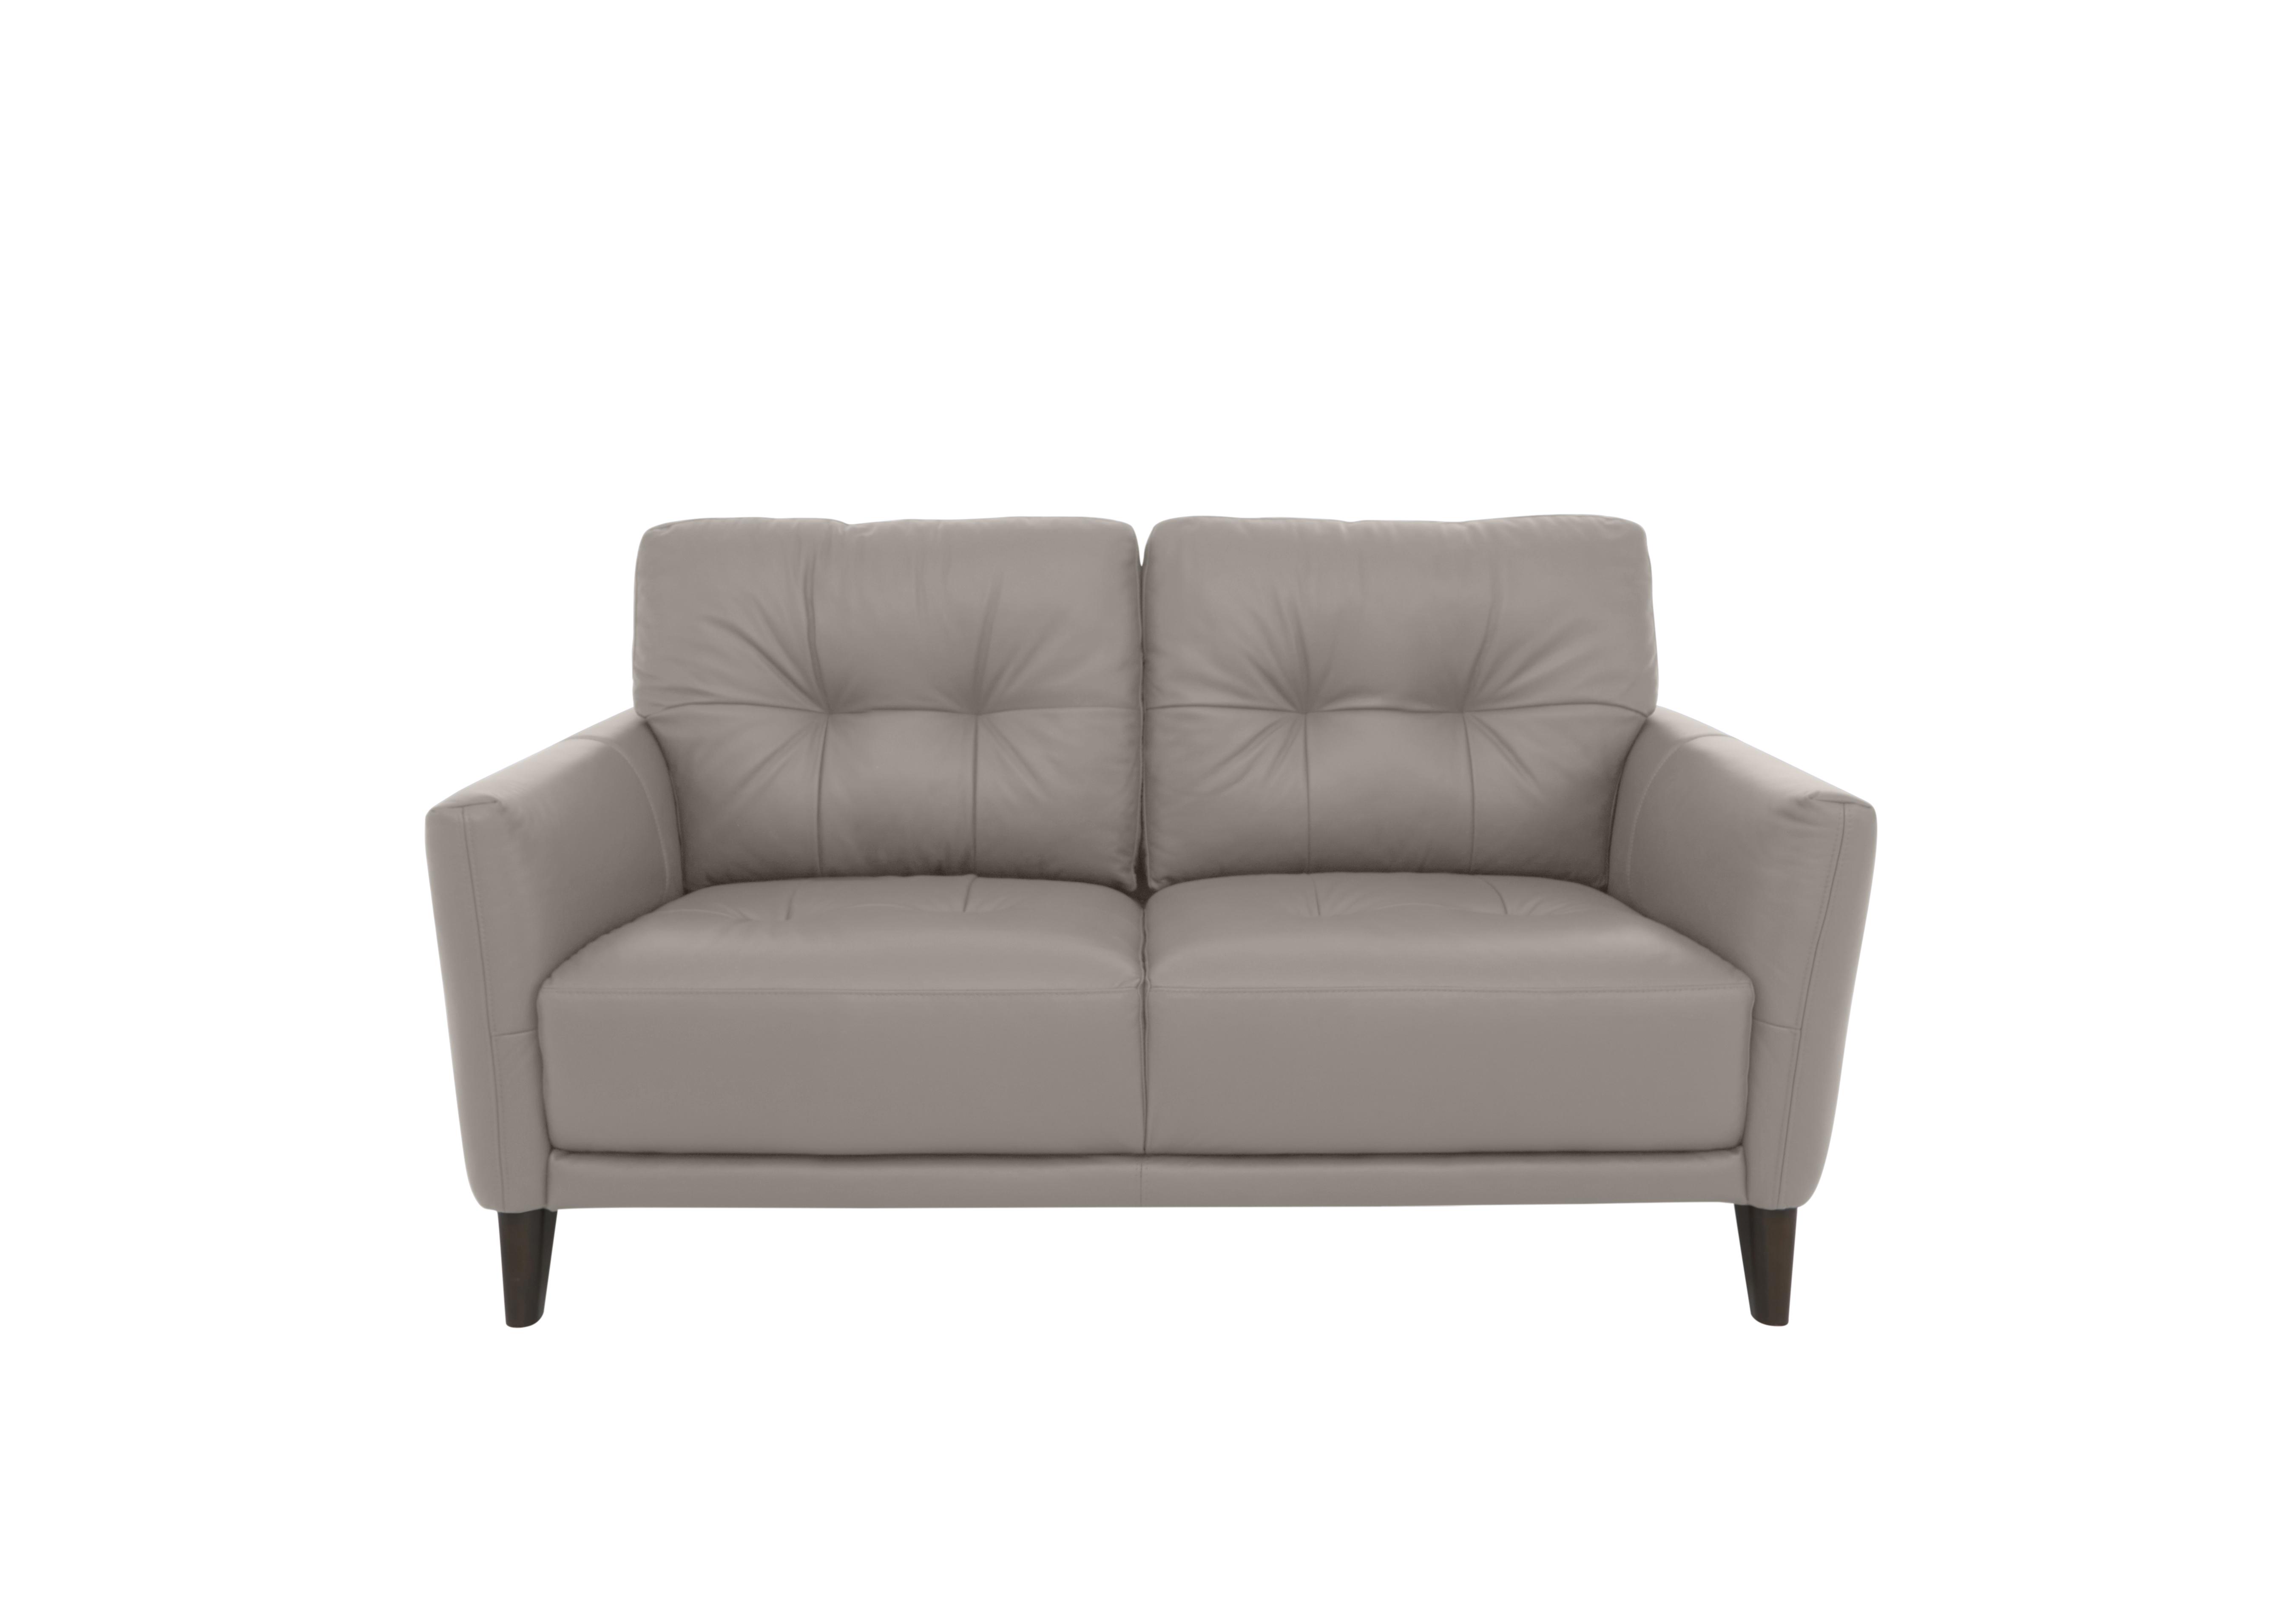 Uno Leather 2 Seater Sofa in Bv-946b Silver Grey on Furniture Village